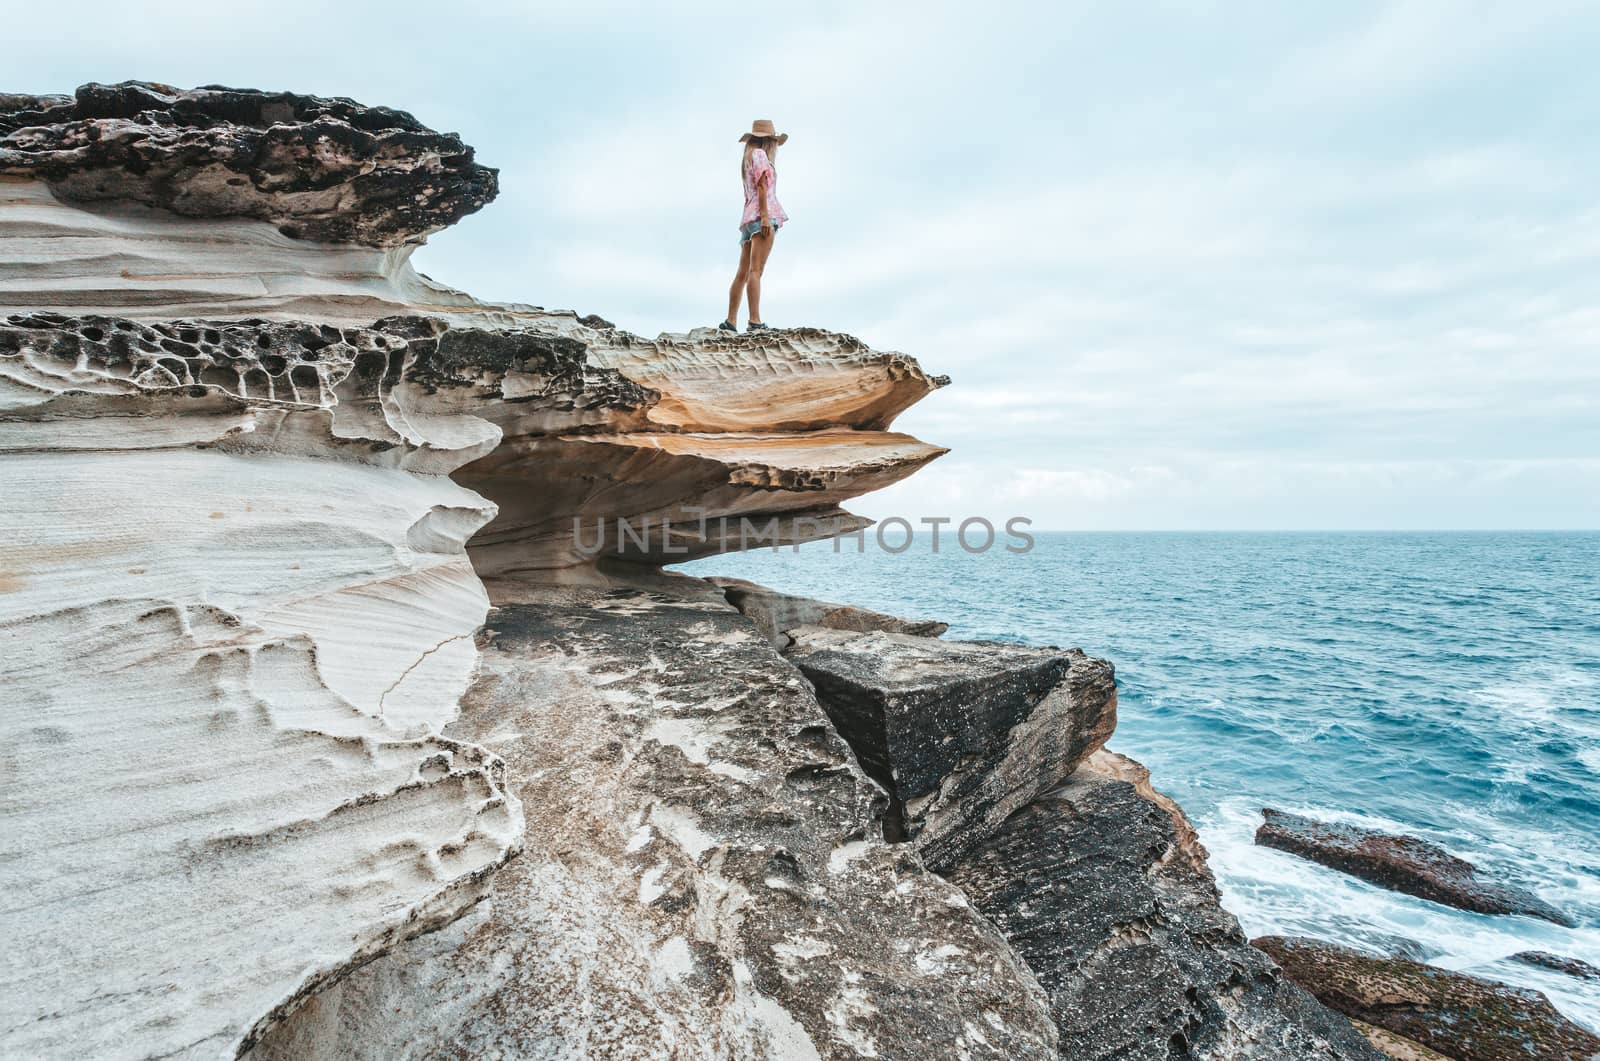 A coastal walk and rock scramble along the Kurnell coastline, admiring the rugged beauty of the coastal cliffs and the large rock falls along here